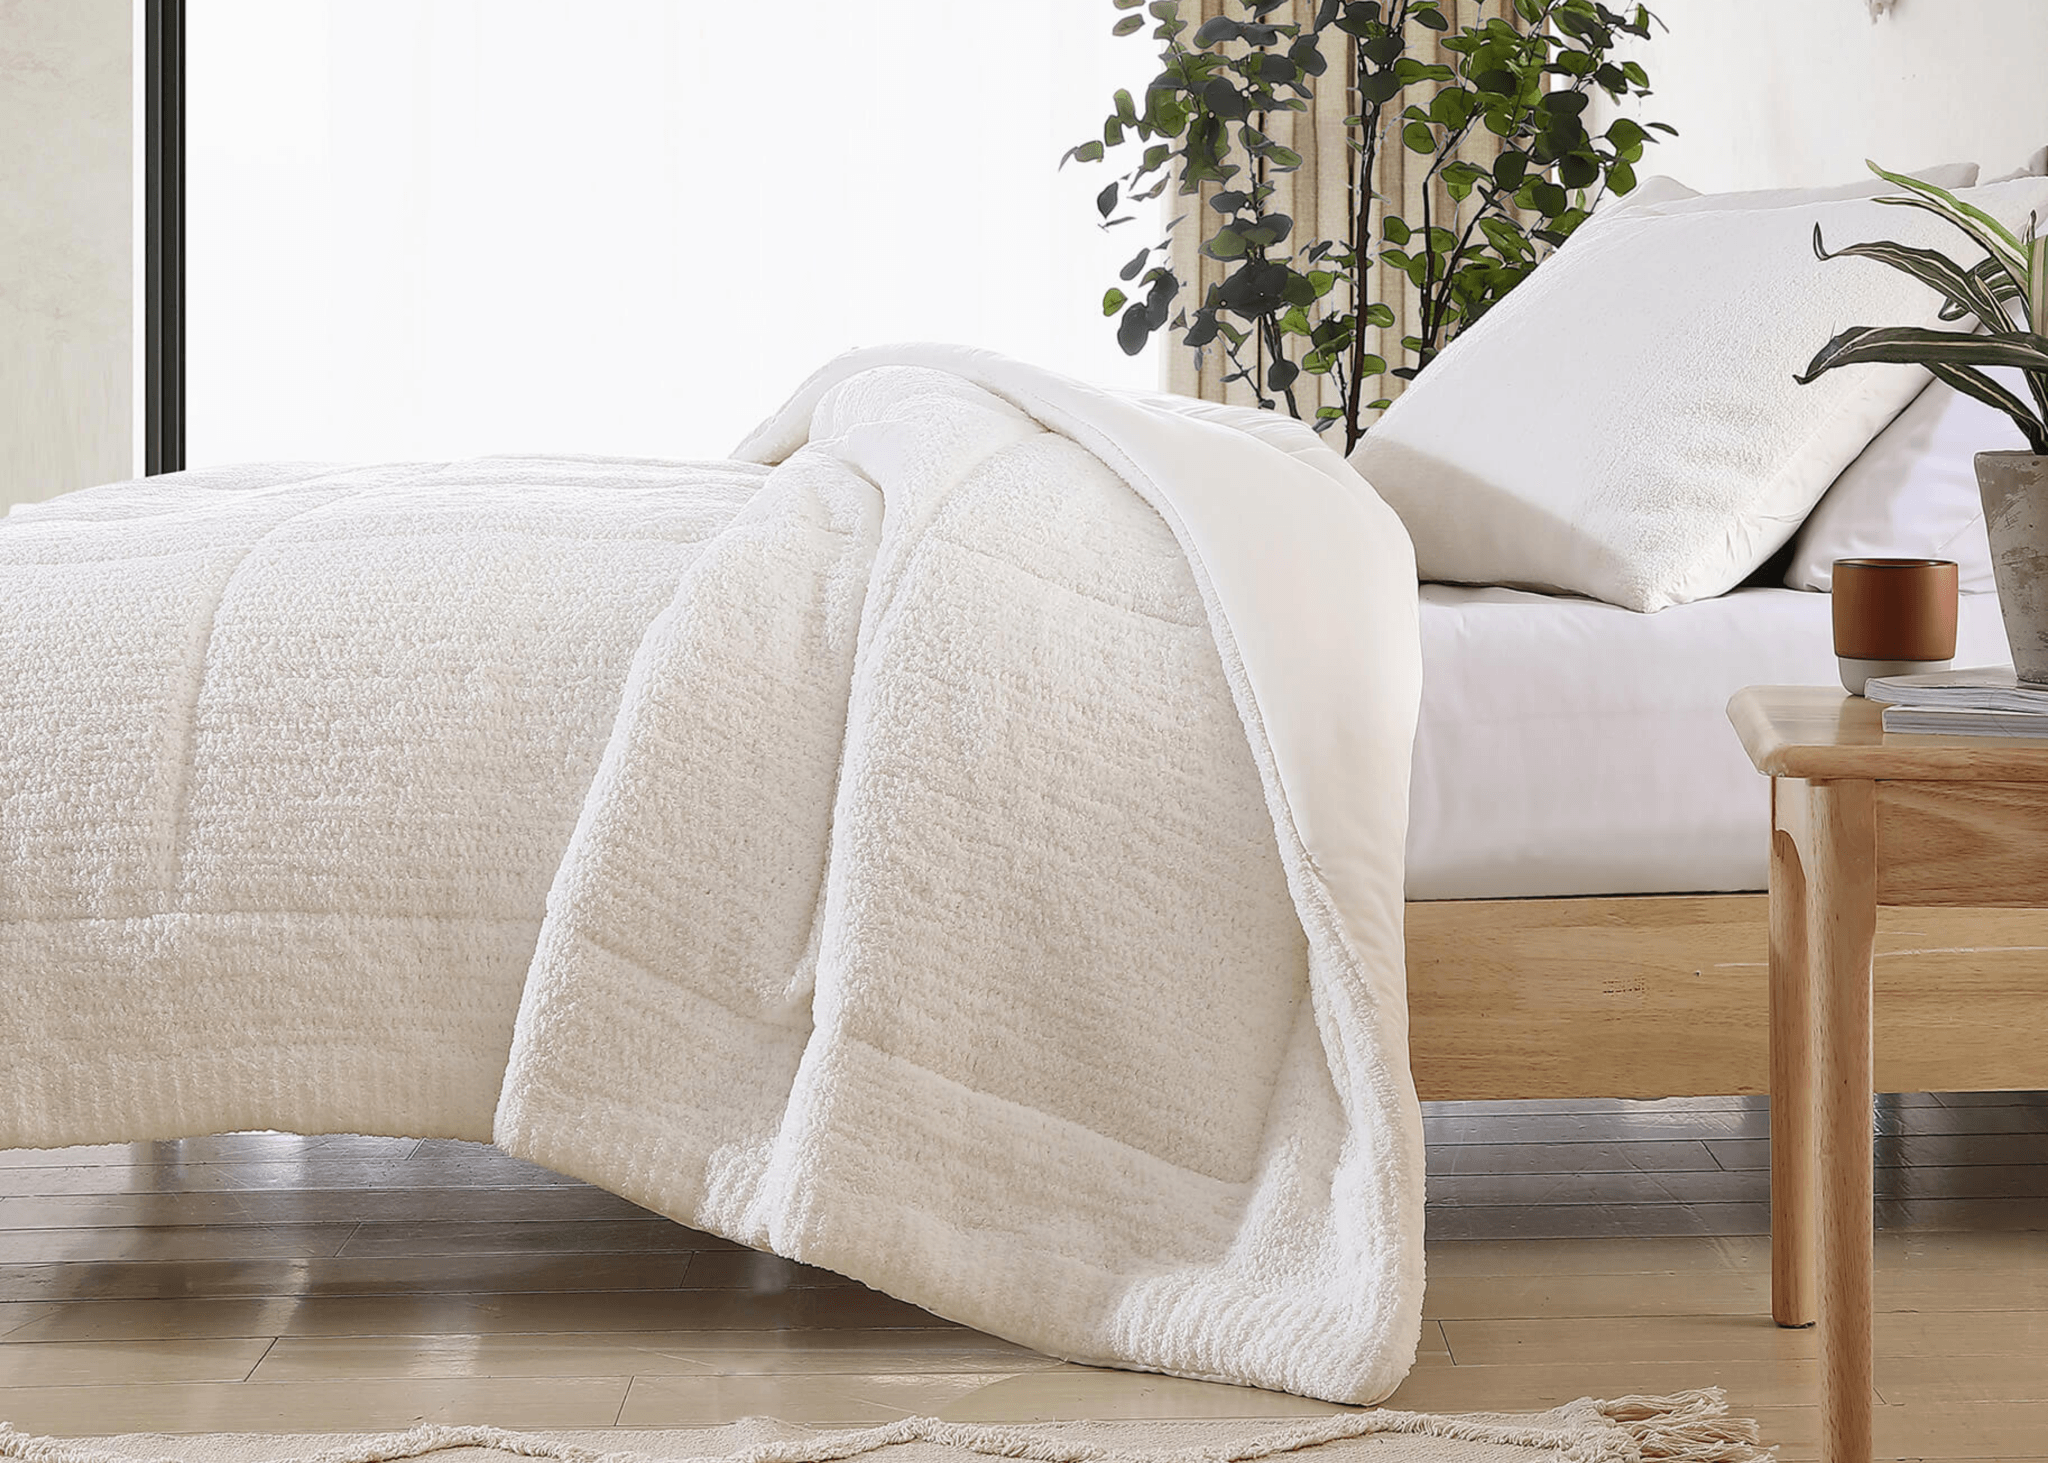 https://cdn.shopify.com/s/files/1/0507/8954/8229/articles/sunday-citizen-snug-quilted-comforter-549438.png?v=1674744397